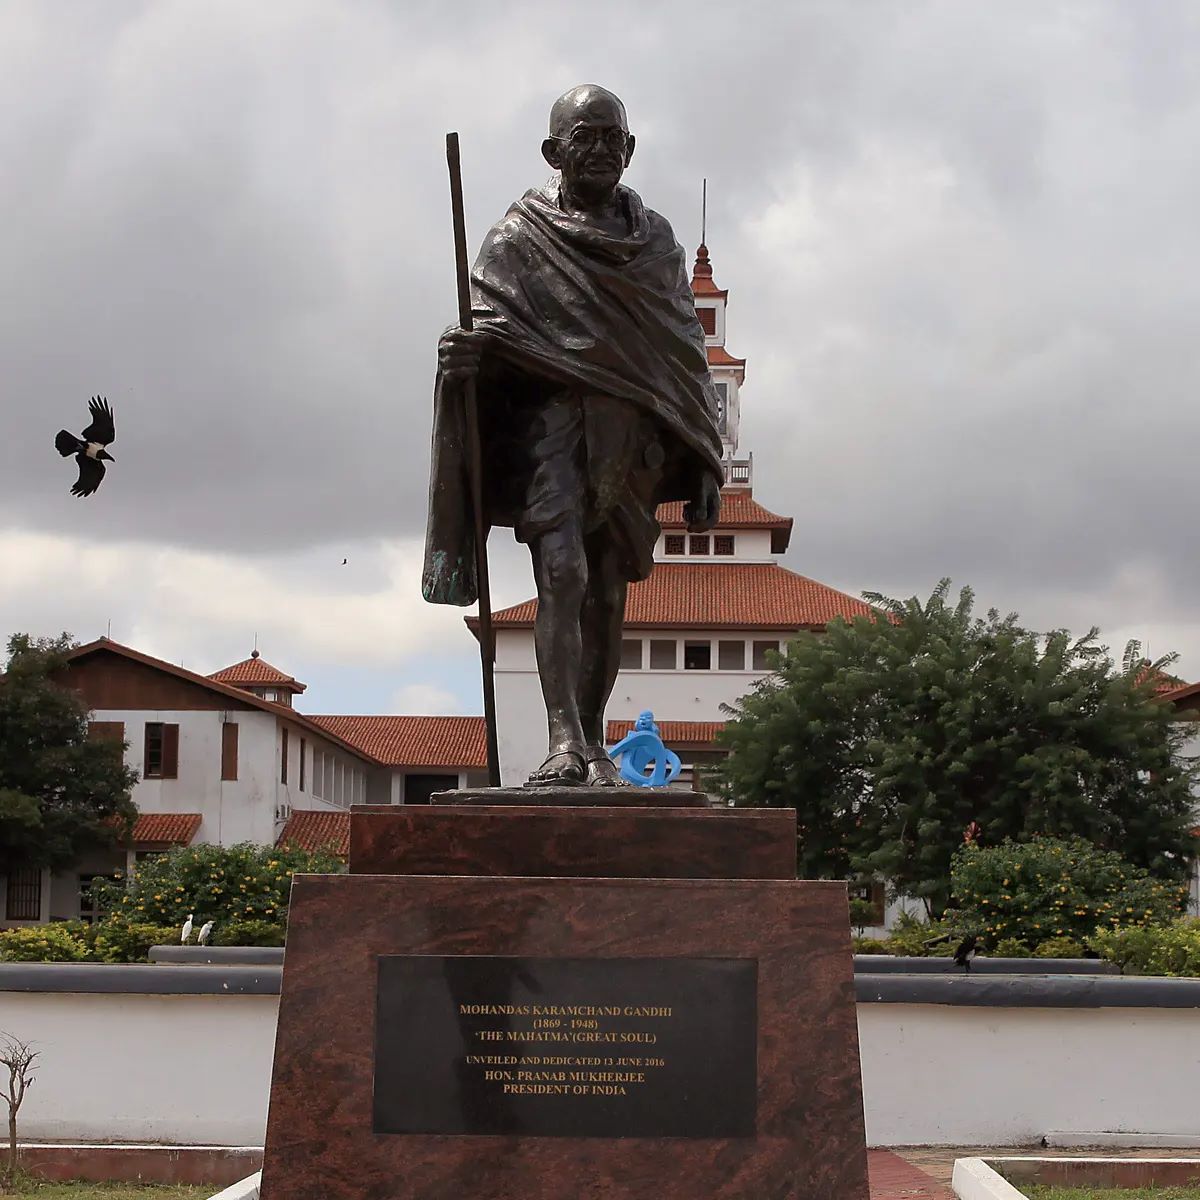 12-astonishing-facts-about-the-gandhi-statue